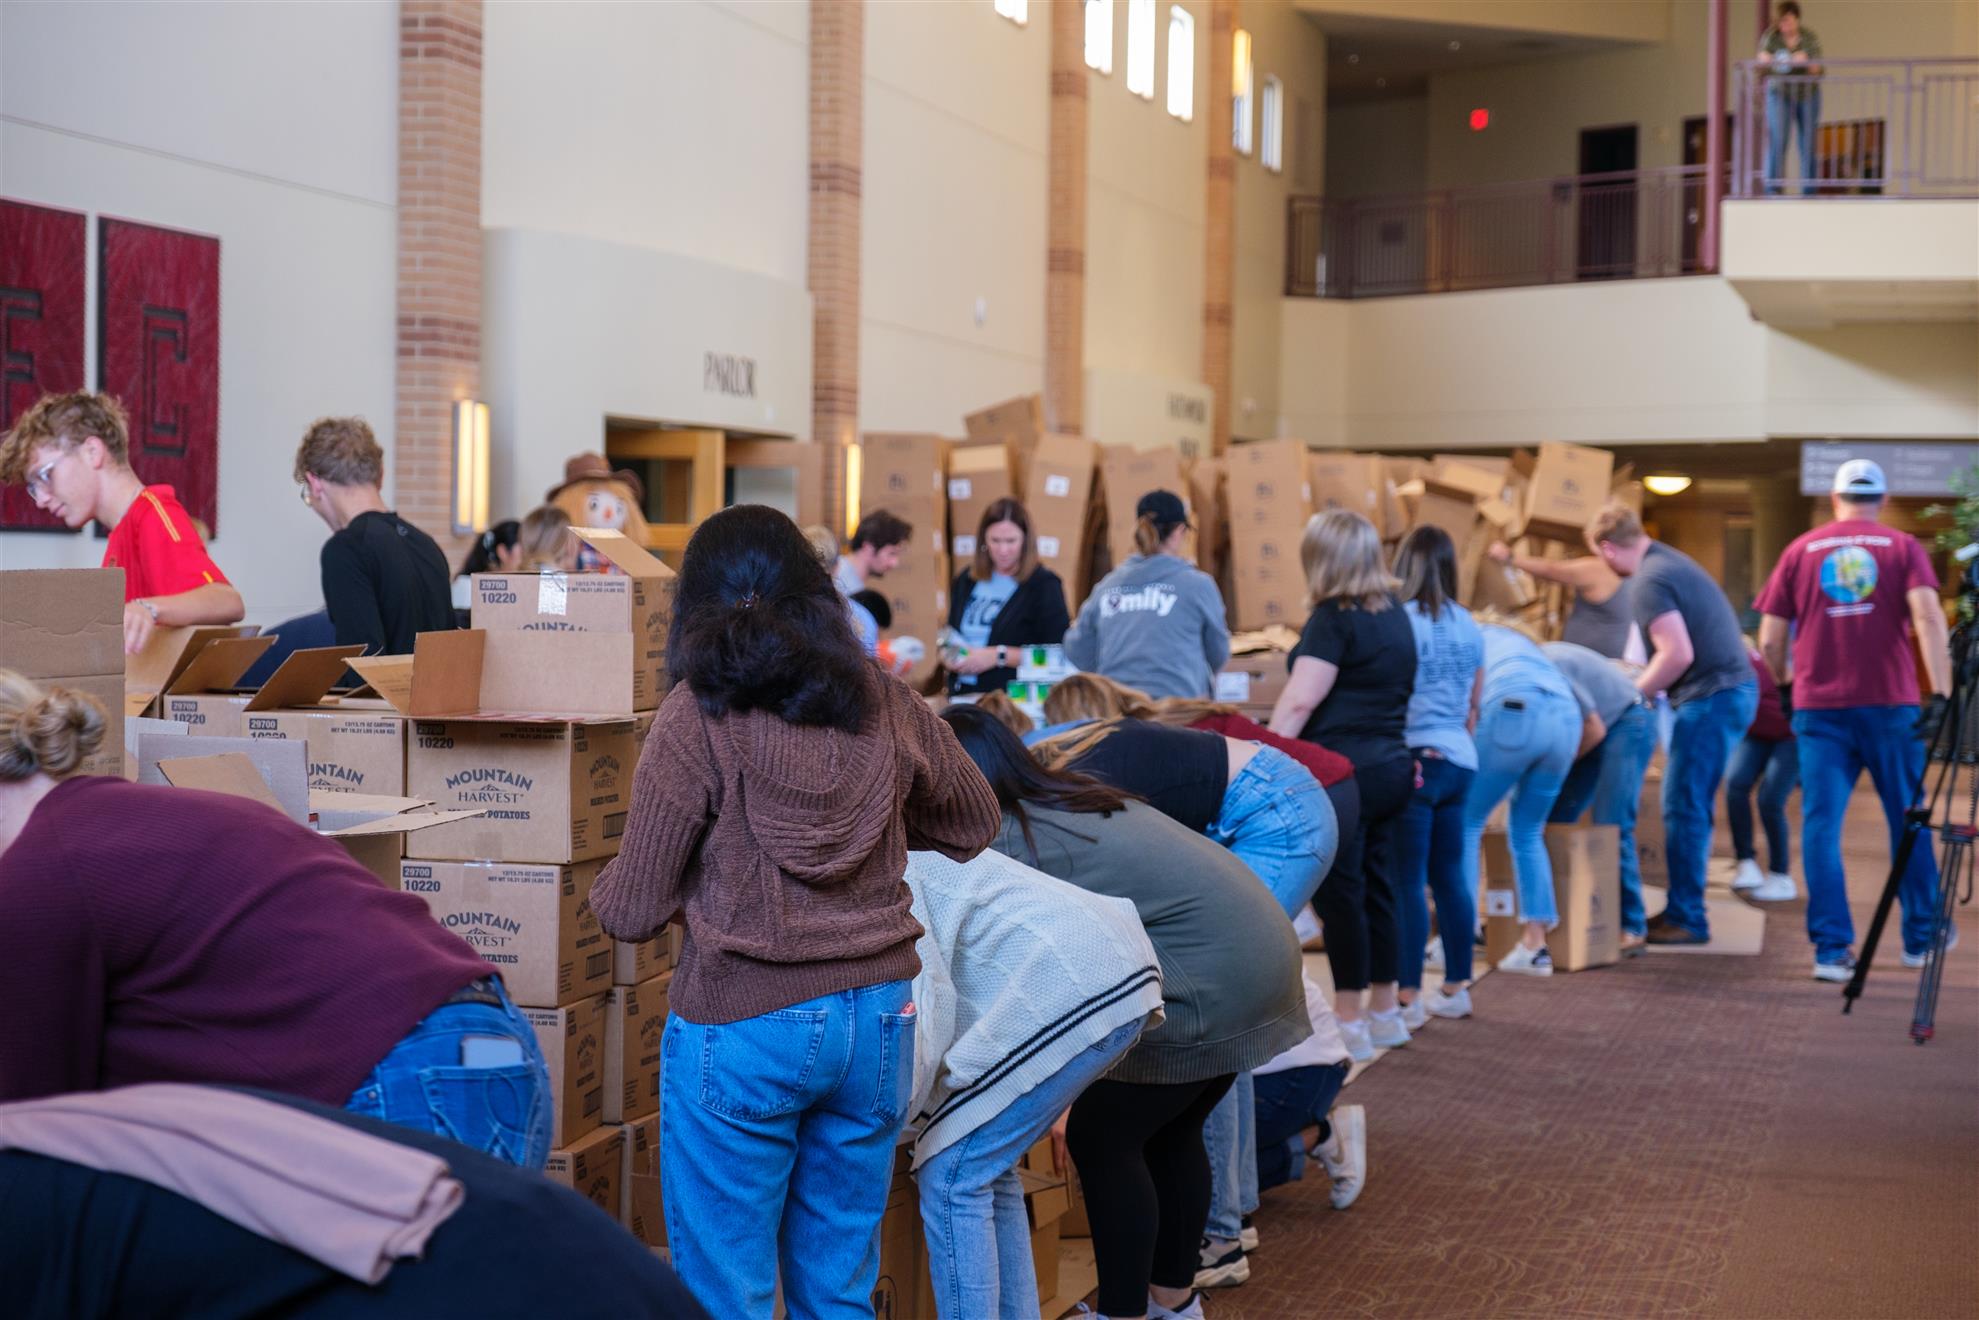 A group of volunteers gather in a church hall to assemble boxes of food.